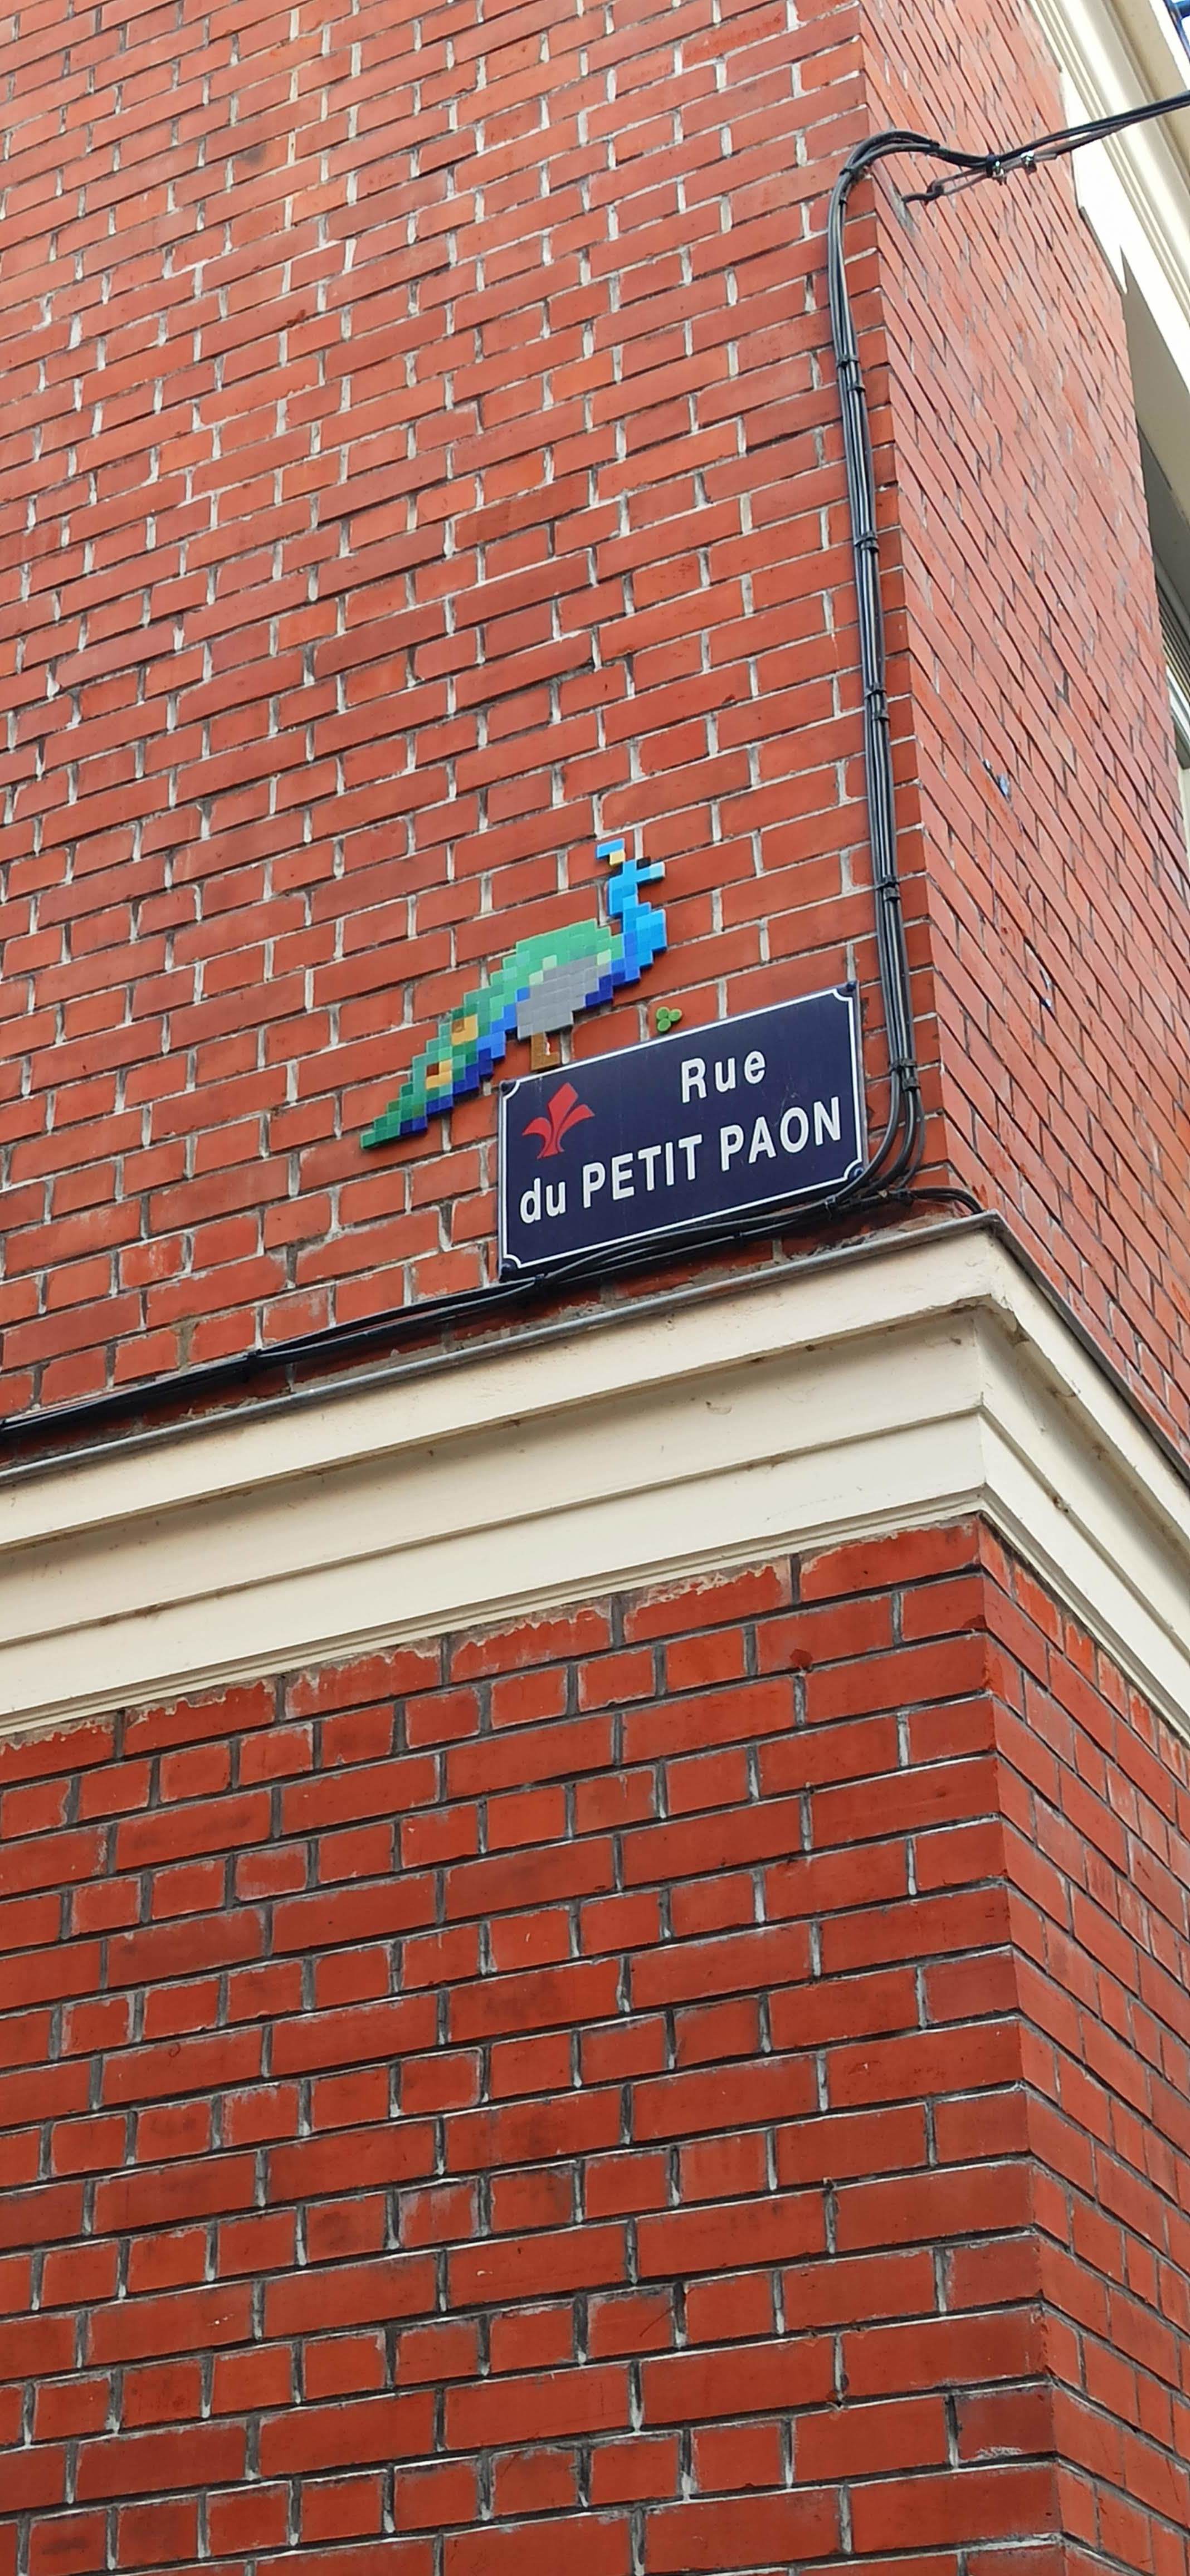 Mosaic 5189 Rue du petit paon by the artist Mifamosa captured by Rabot in Lille France